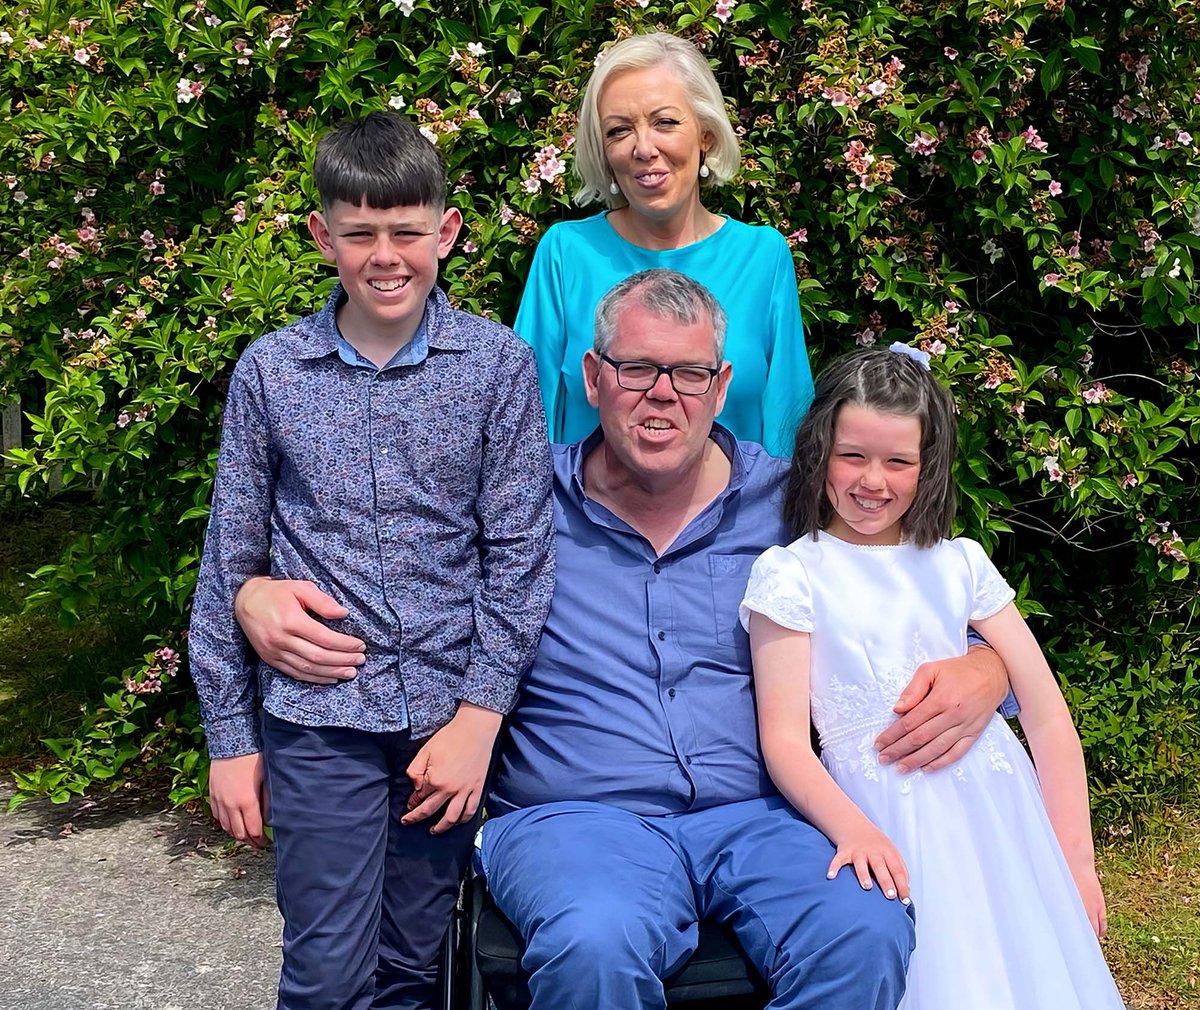 It was an inspiring ‘magical’ sight when friends of Paul Murphy, who is suffering from a devastating rare condition, arrived into Killarney after completing a week-long 350-kilometre cross-country wheelchair push to raise funds for their friend’s medical costs